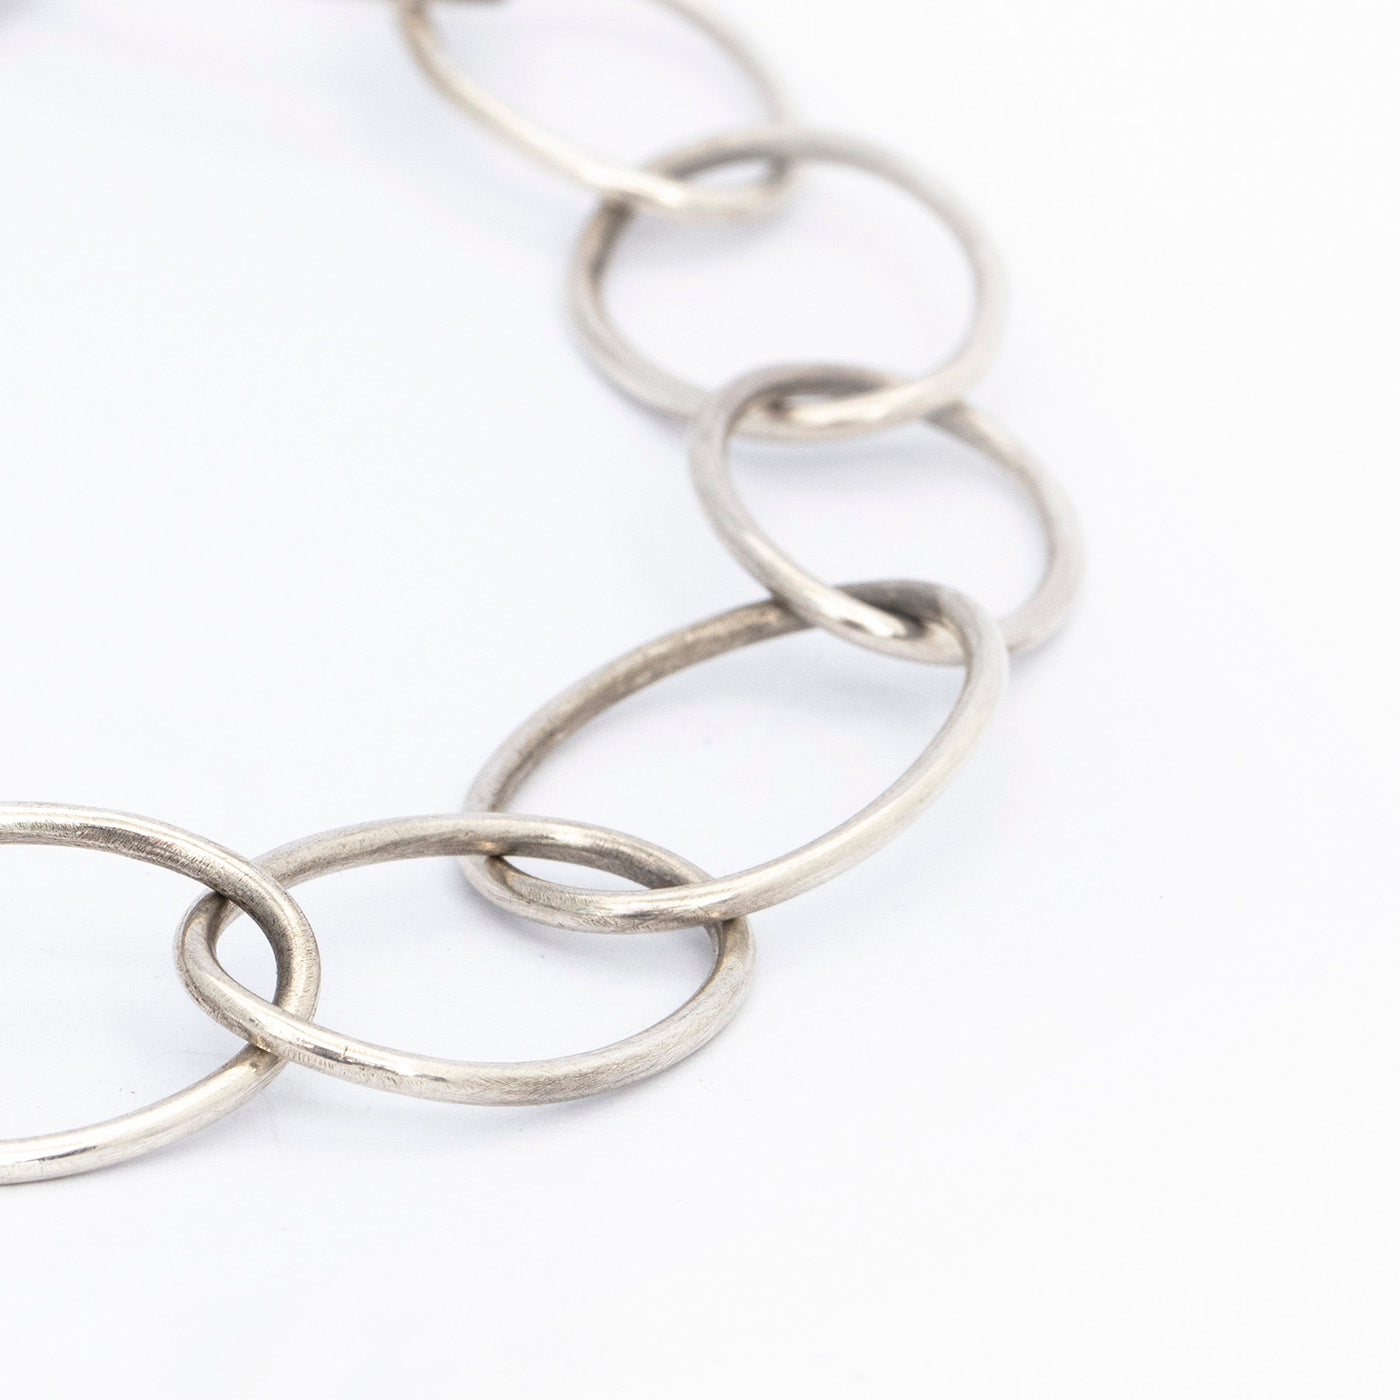 Necklace choker Gia sterling silver product image innan jewellery berlin